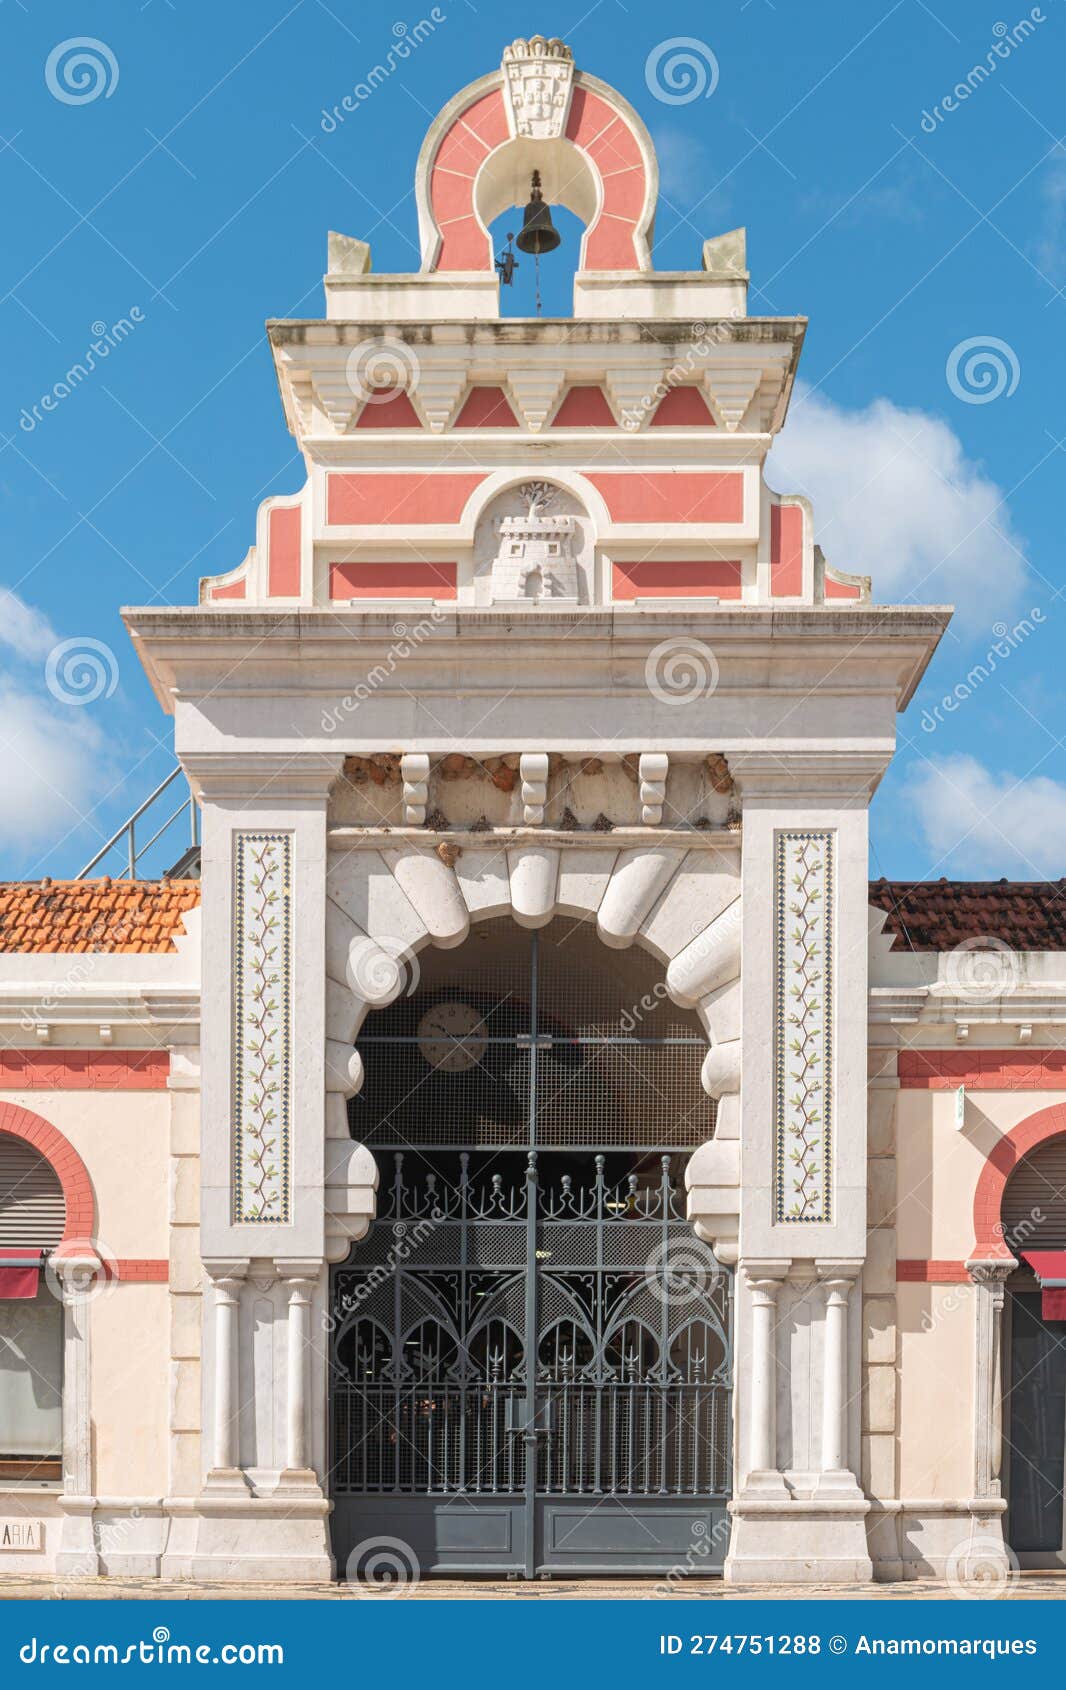 moorish architectural facade of the traditional market. the markethall in the old town of loule. algarve, portugal.